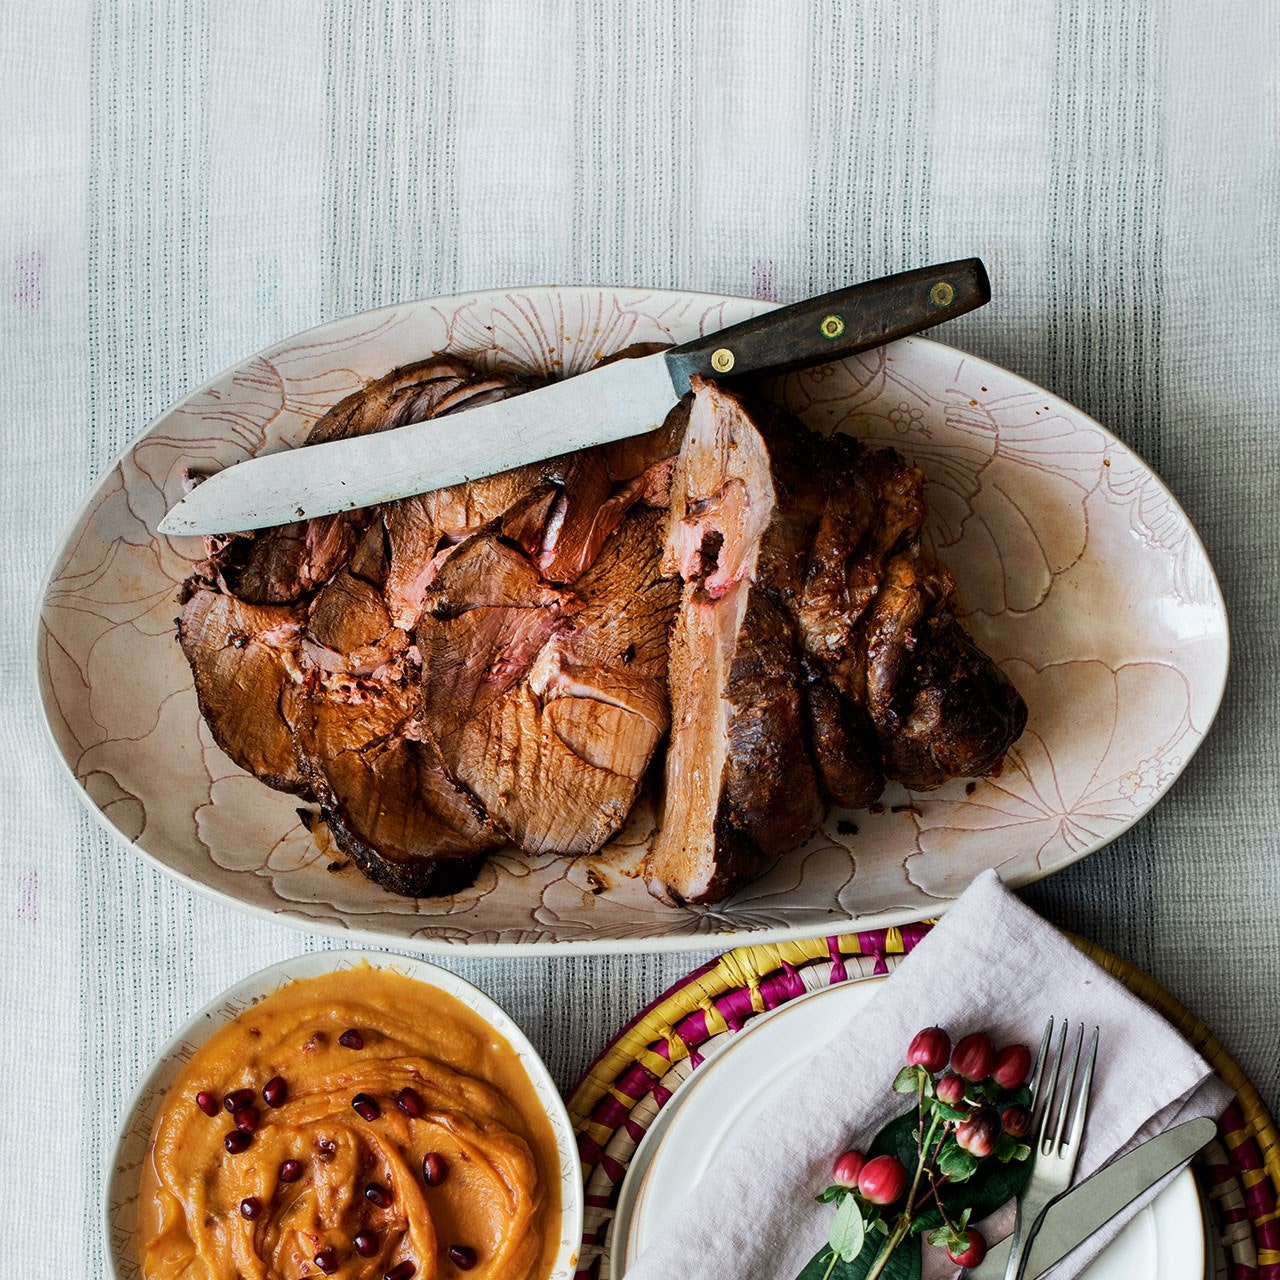 Roast haunch of venison with squash and pomegranate